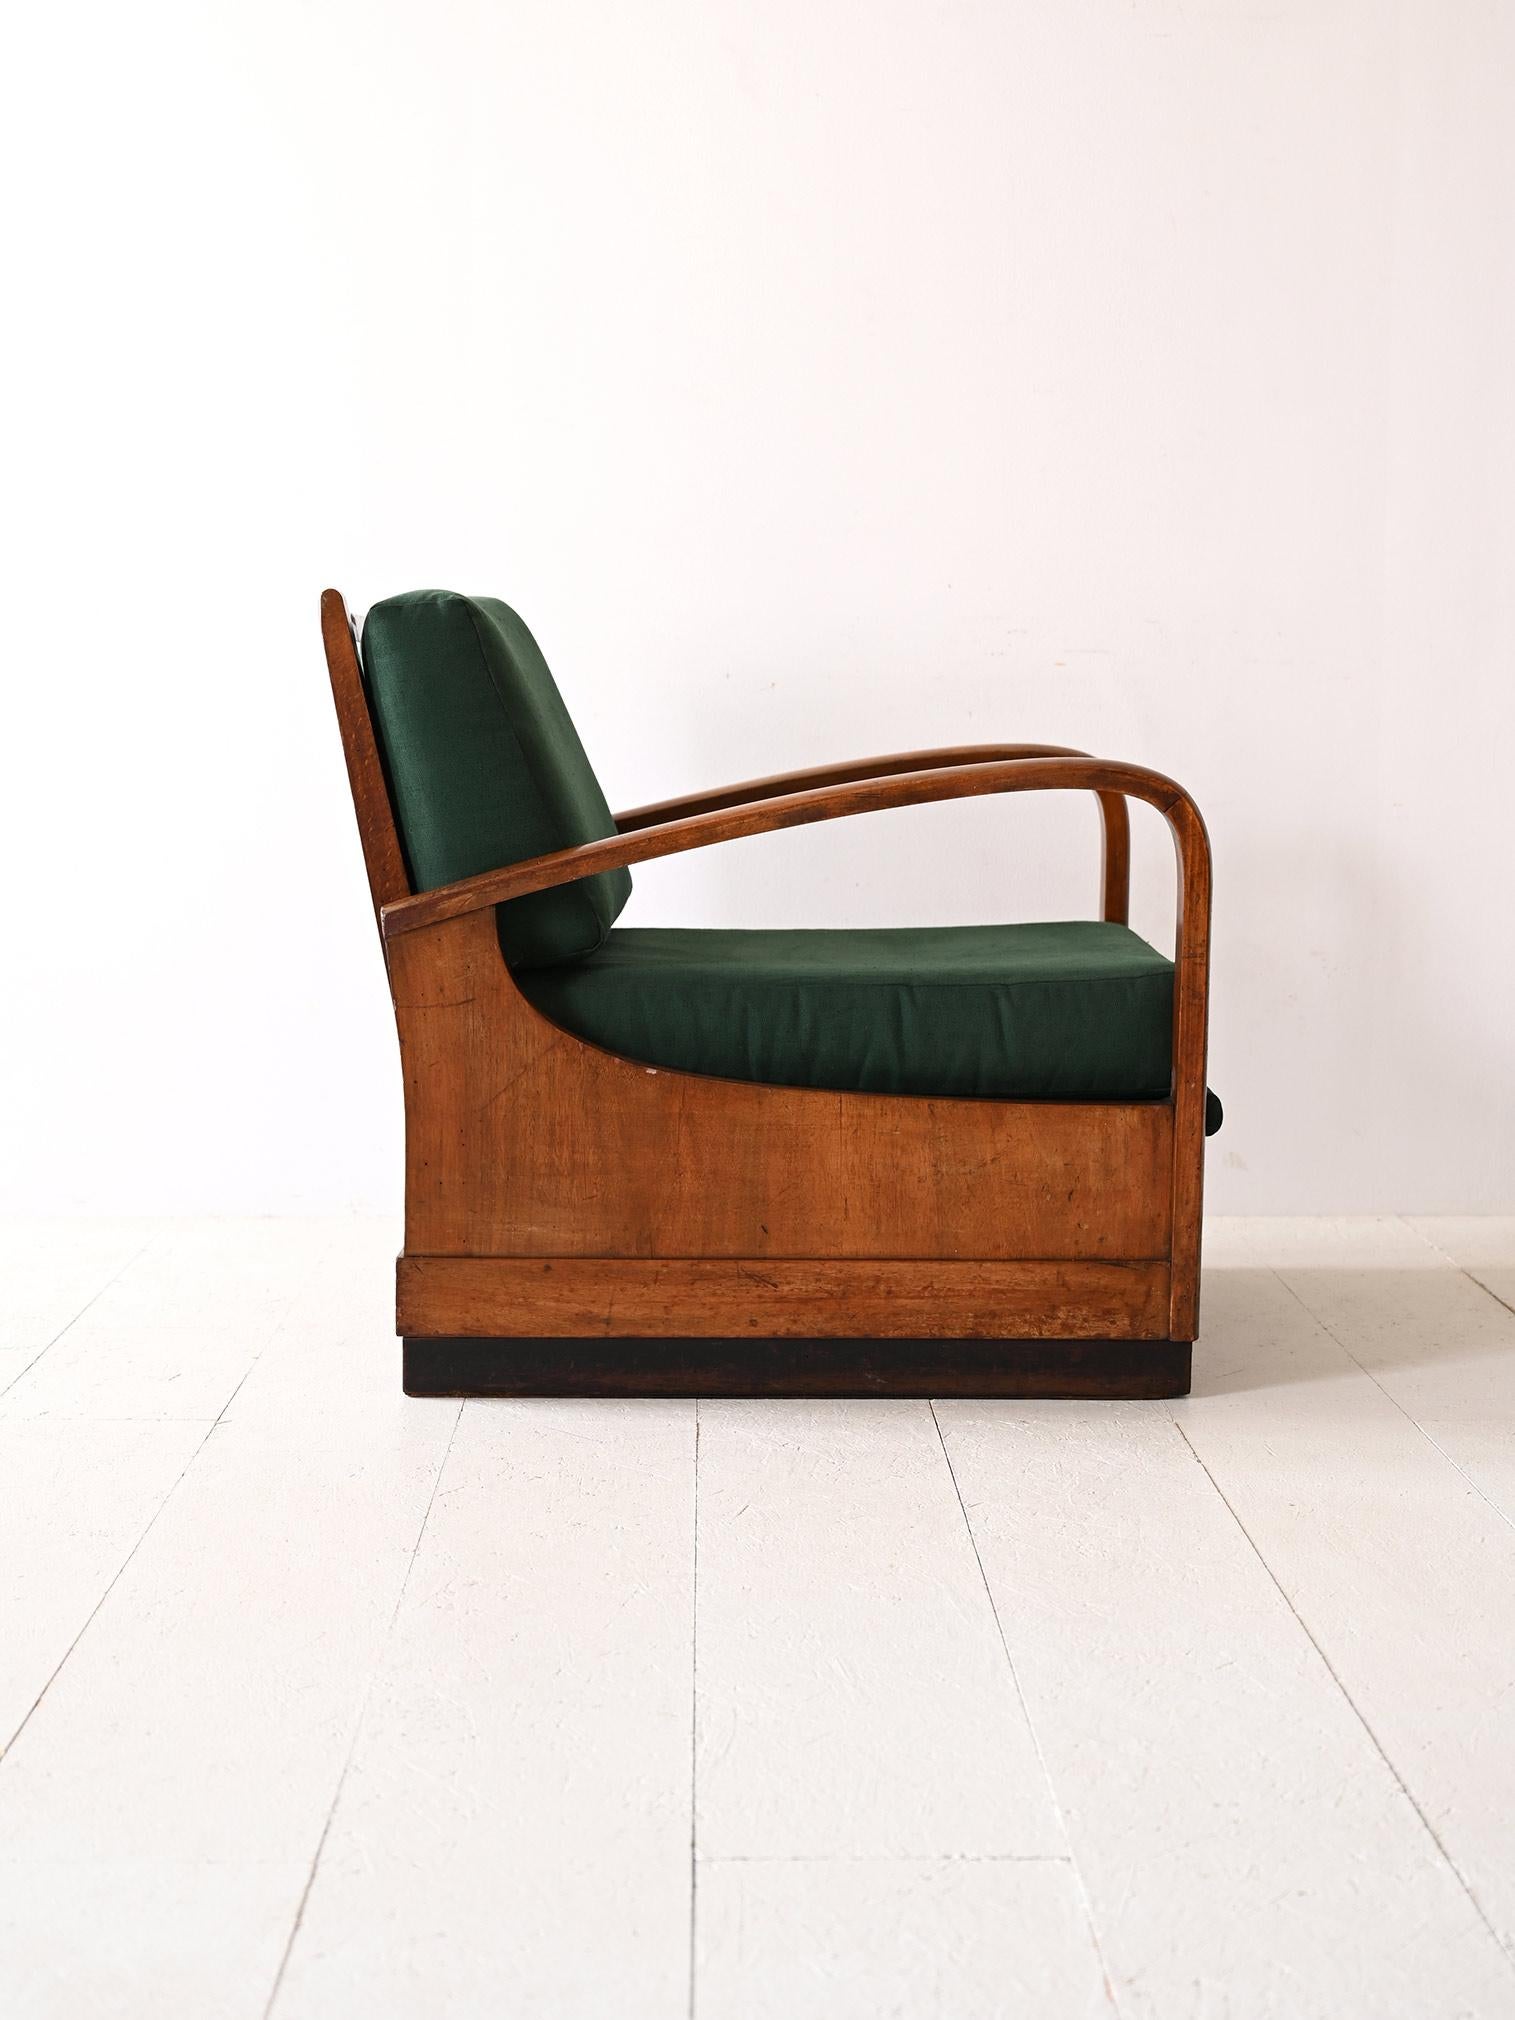 The 1940s Art Deco armchair embodies a dual functionality: a comfortable seat that converts into a bed. The wood, with its curved lines and patina finish, adds a touch of historicity, while the green siding is suggestive of the style of the era.